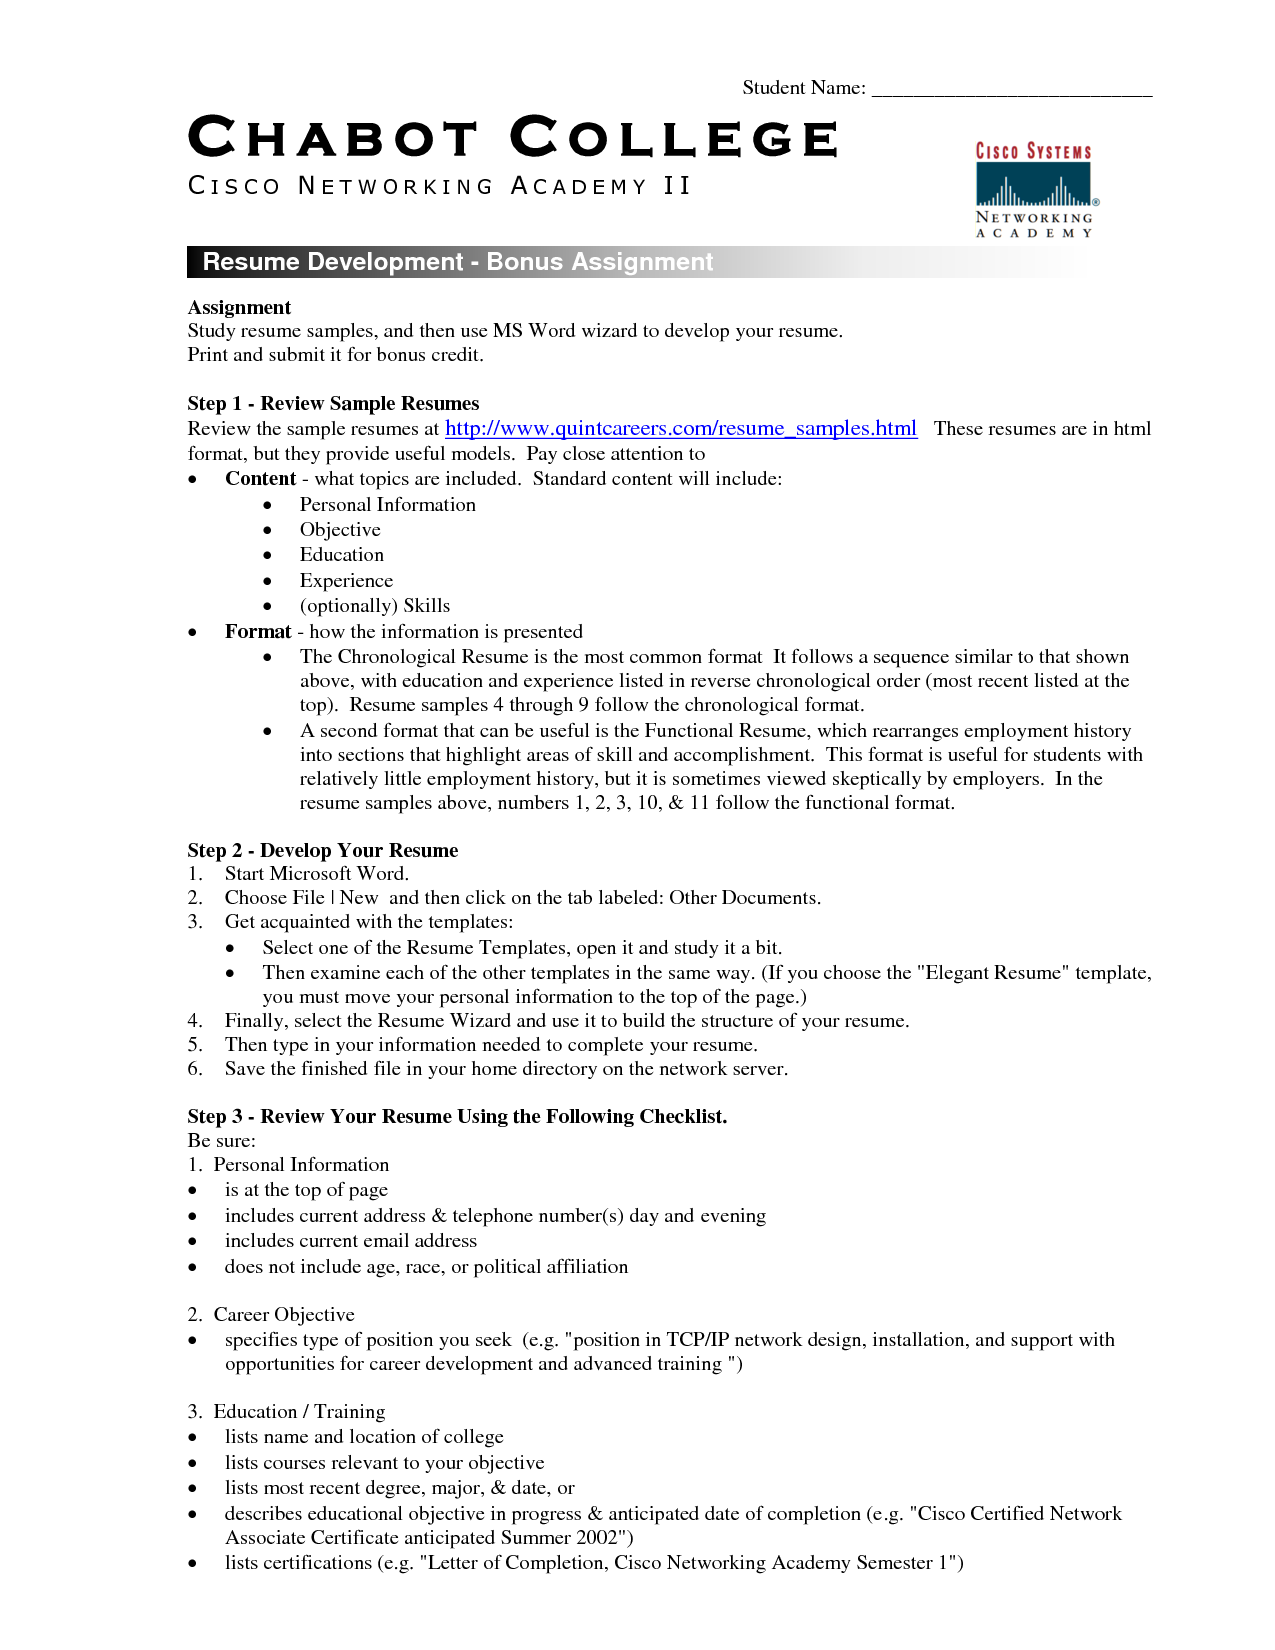 Student resume template word September 24 With Regard To College Student Resume Template Microsoft Word